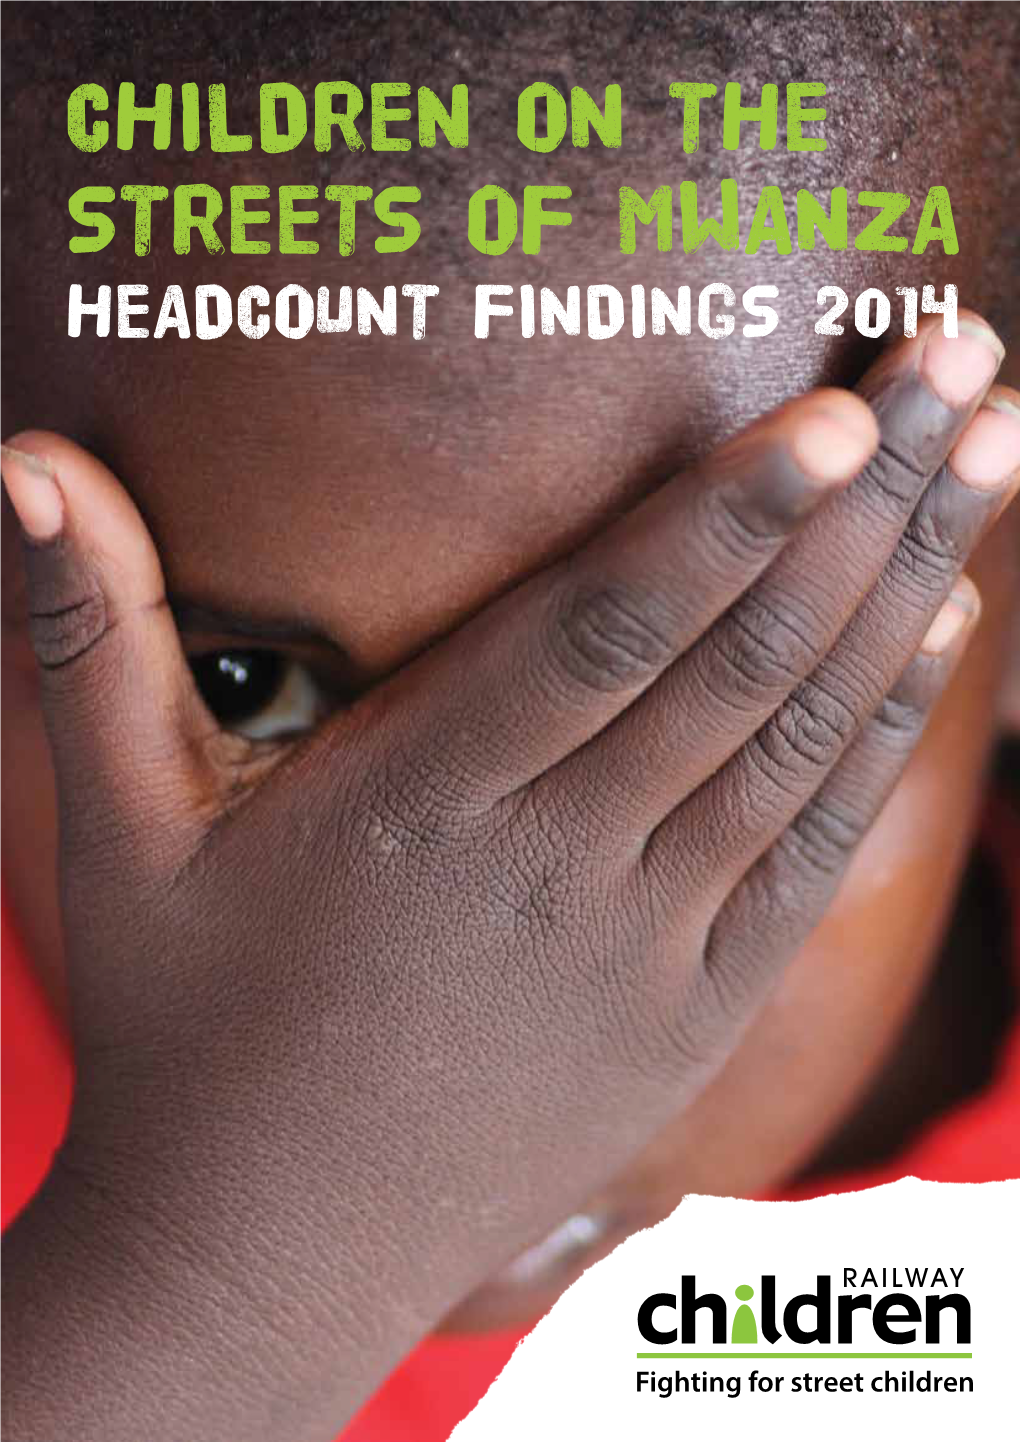 Children on the Streets of Mwanza: Headcount Findings 2014